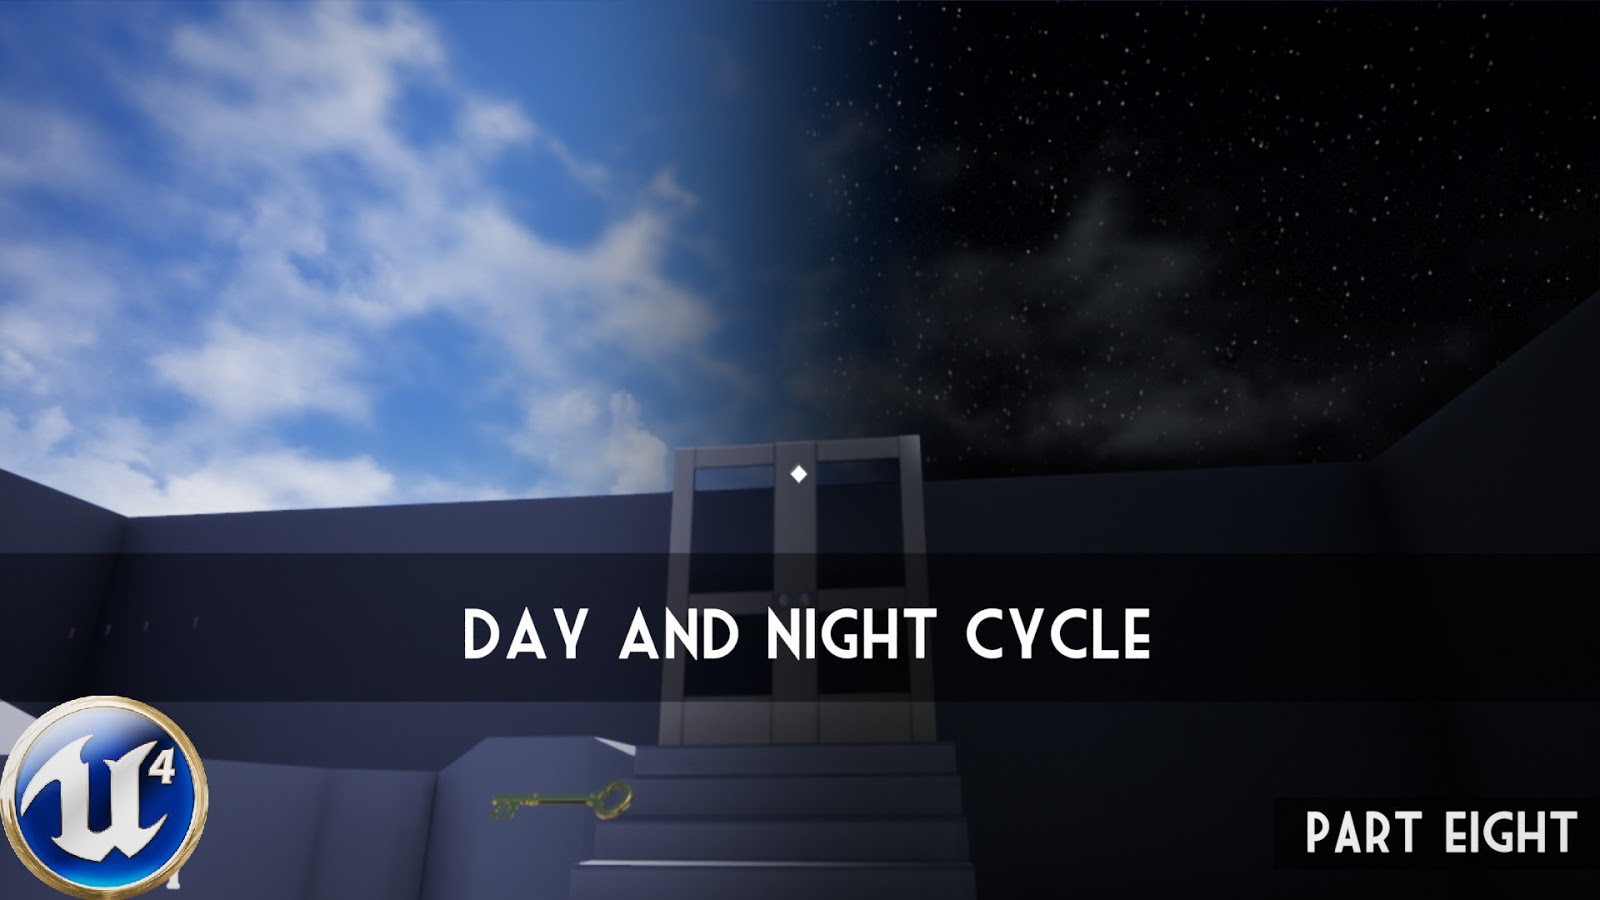 4 day and night. Day and Night игра. Ue4 Day Night Cycle. Ue4 Day Night Cycle BP. Skysphere Day Night Cycle.